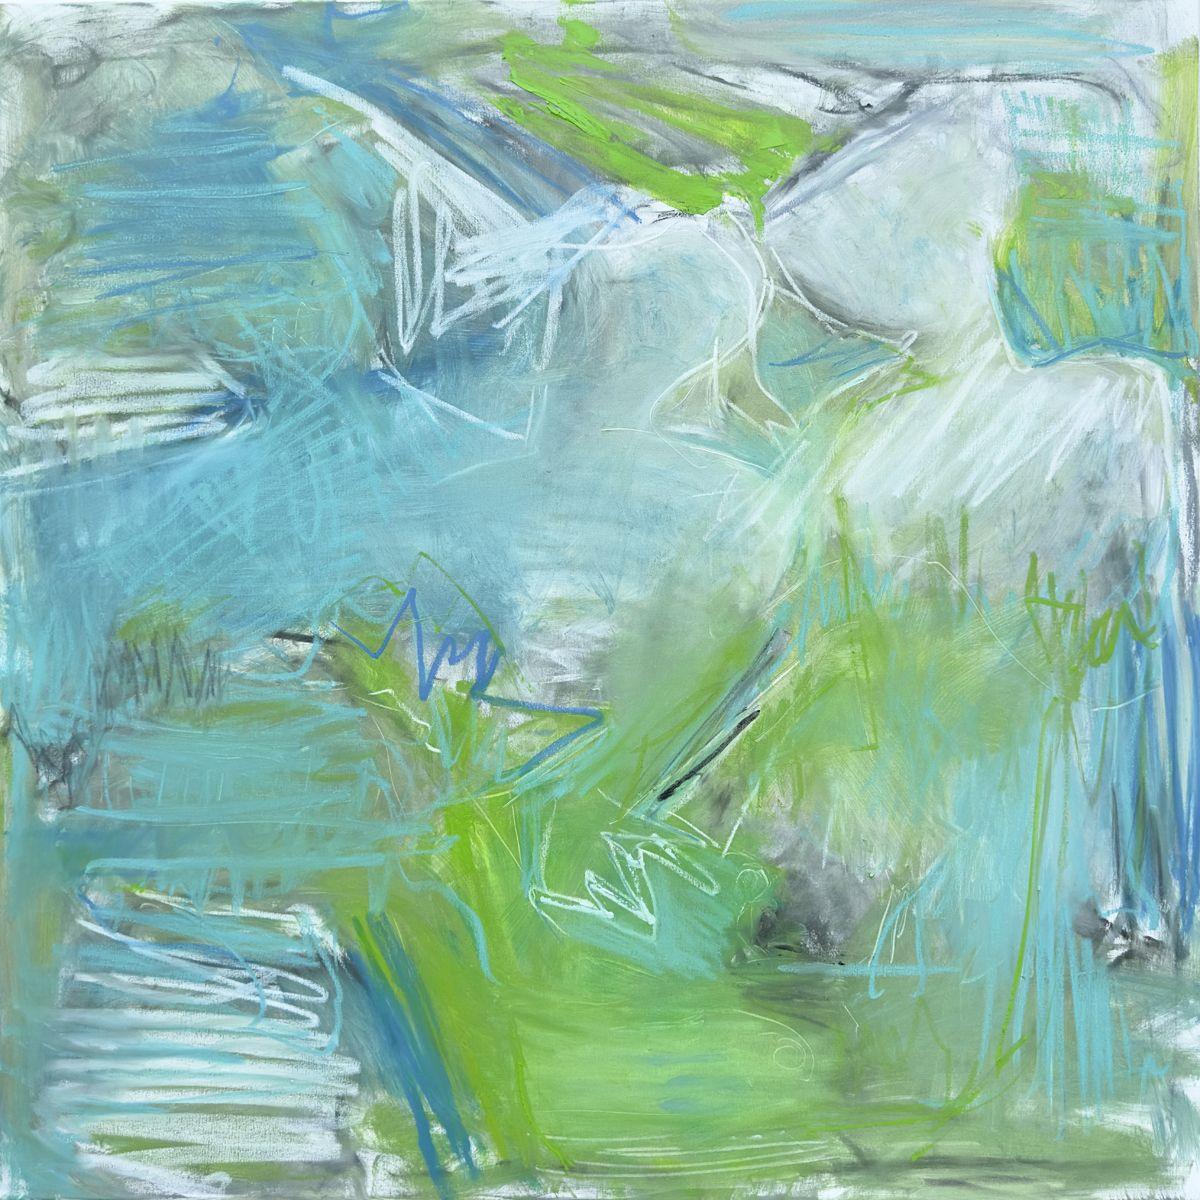 "Electricity" is a large abstract expressionist oil painting on canvas by artist Trixie Pitts. The palette consists of bright green, light blue, blue, robin's egg turquoise, white with a hint of black. The lively brushwork, bold strokes and